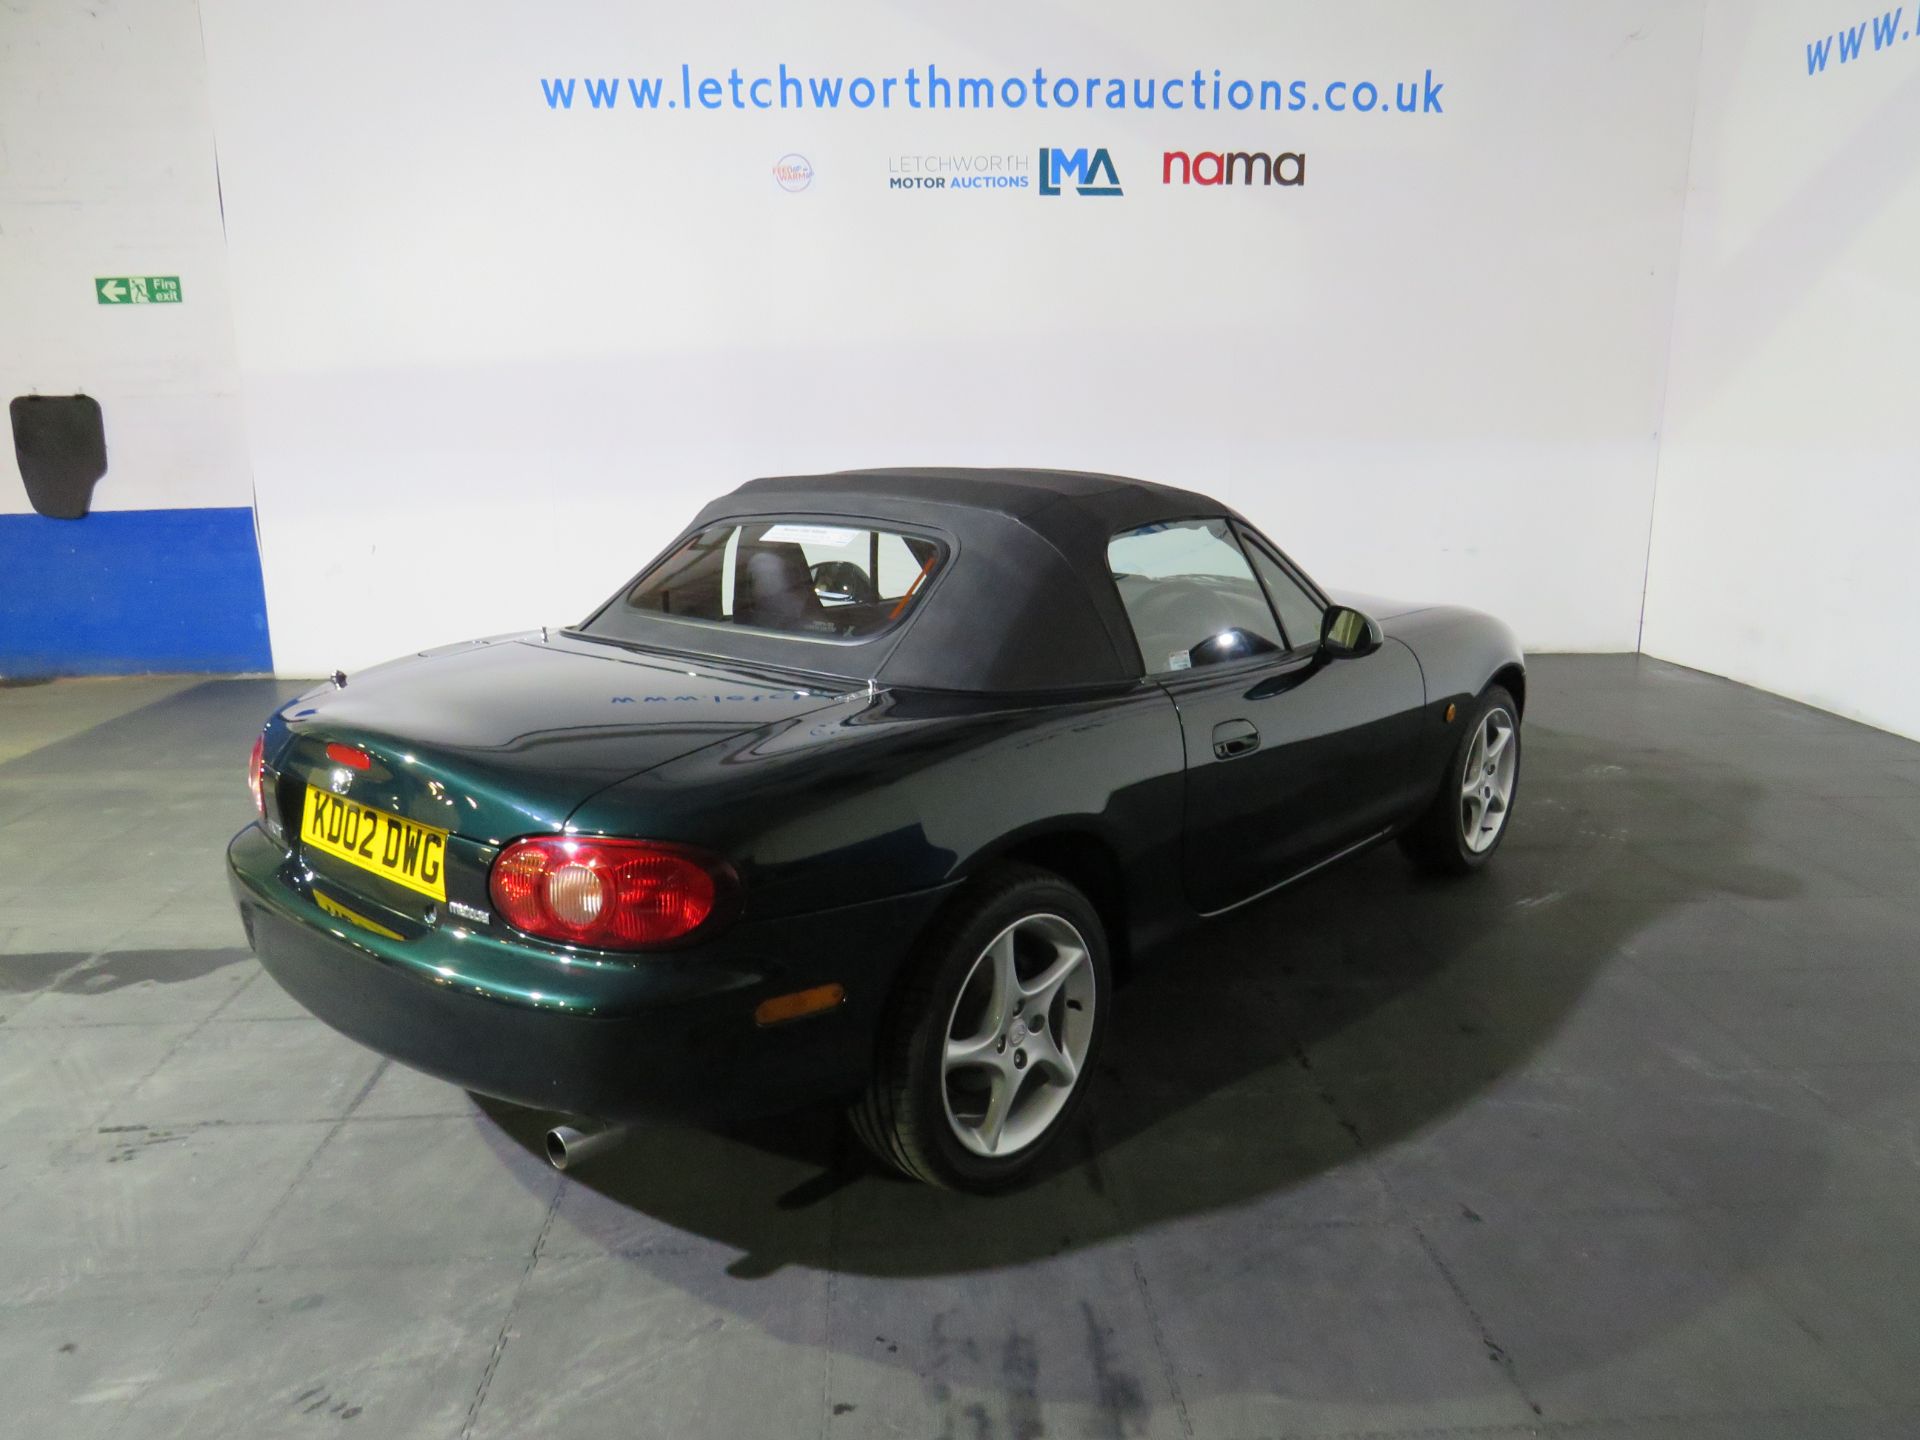 2002 Mazda MX-5 - 1598cc - 1,900 MILES FROM NEW - Image 12 of 39